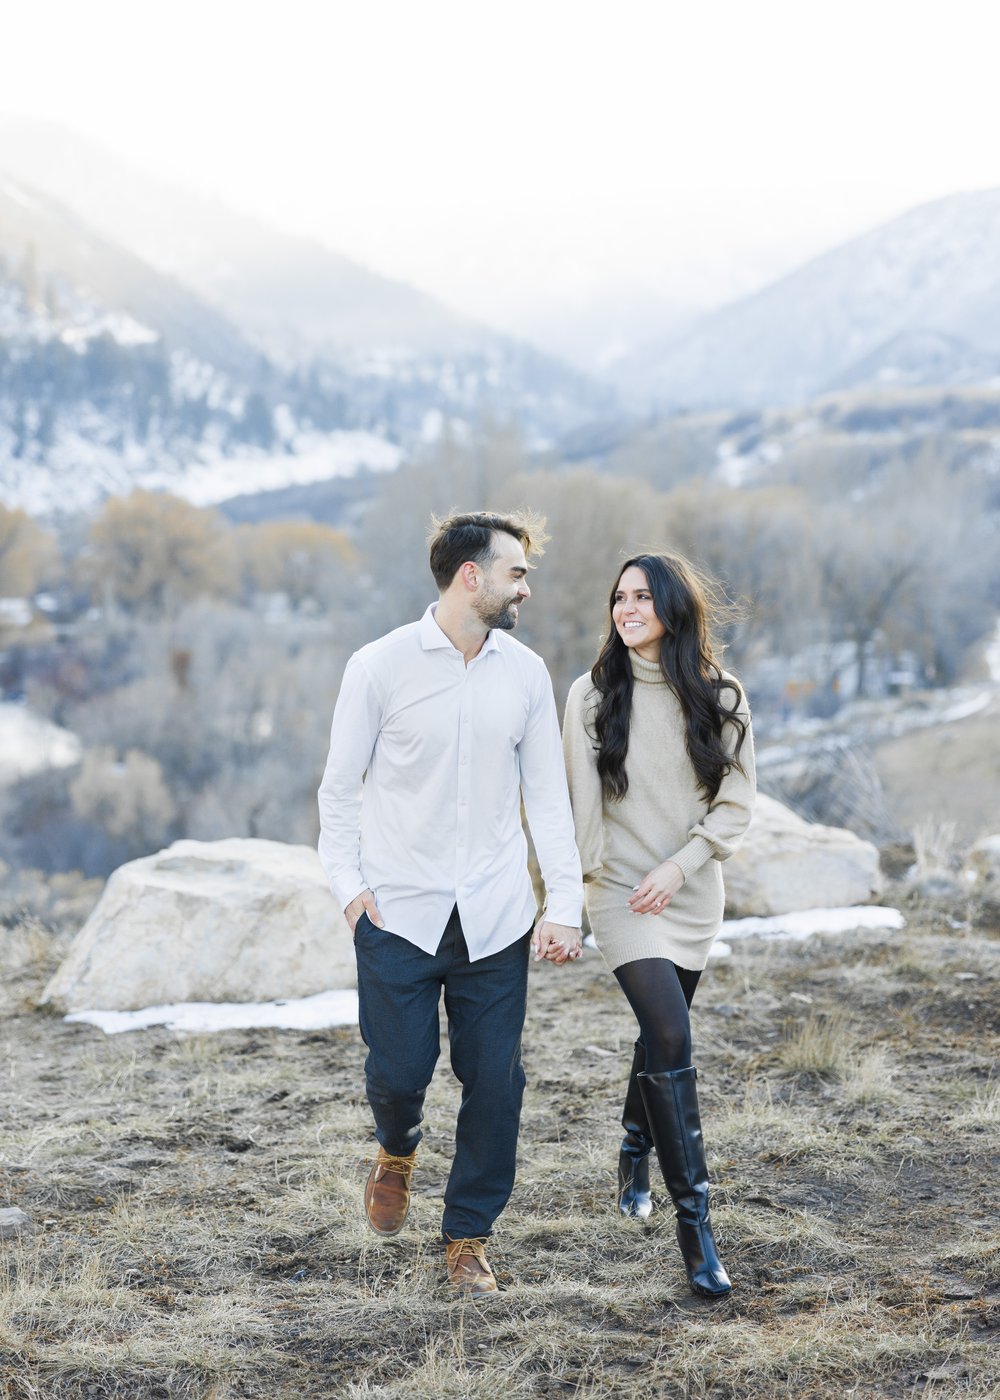  A man and woman walking together on a snowy mountaintop by Savanna Richardson Photography a Utah Professional. Utah proposal photos #SavannaRichardsonPhotography #Proposal #proposalphotography #ProProposalCompany #engaged #engagementphotography 